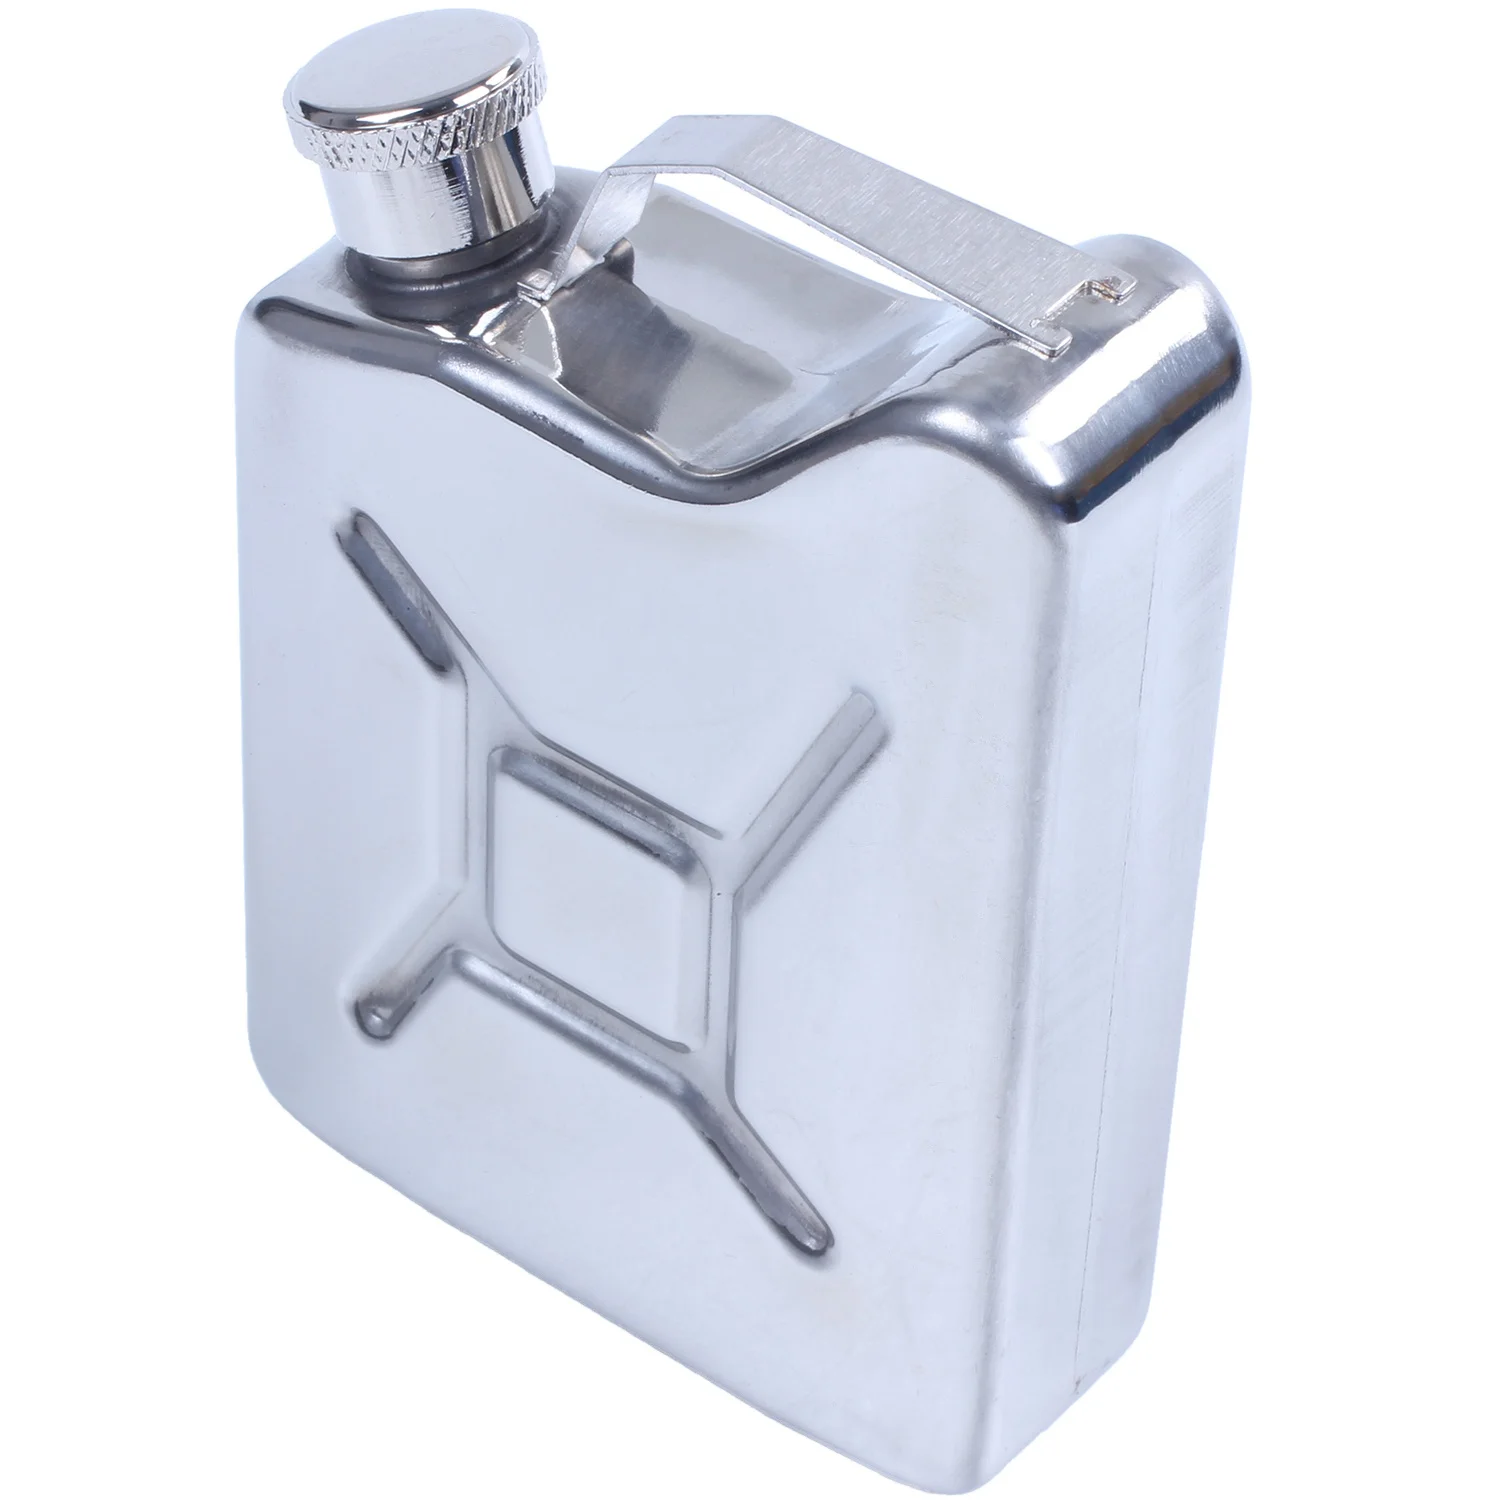 

Mini Stainless Steel 5oz Hip Flask Liquor Whiskey Alcohol Fuel Gas Gasoline Can